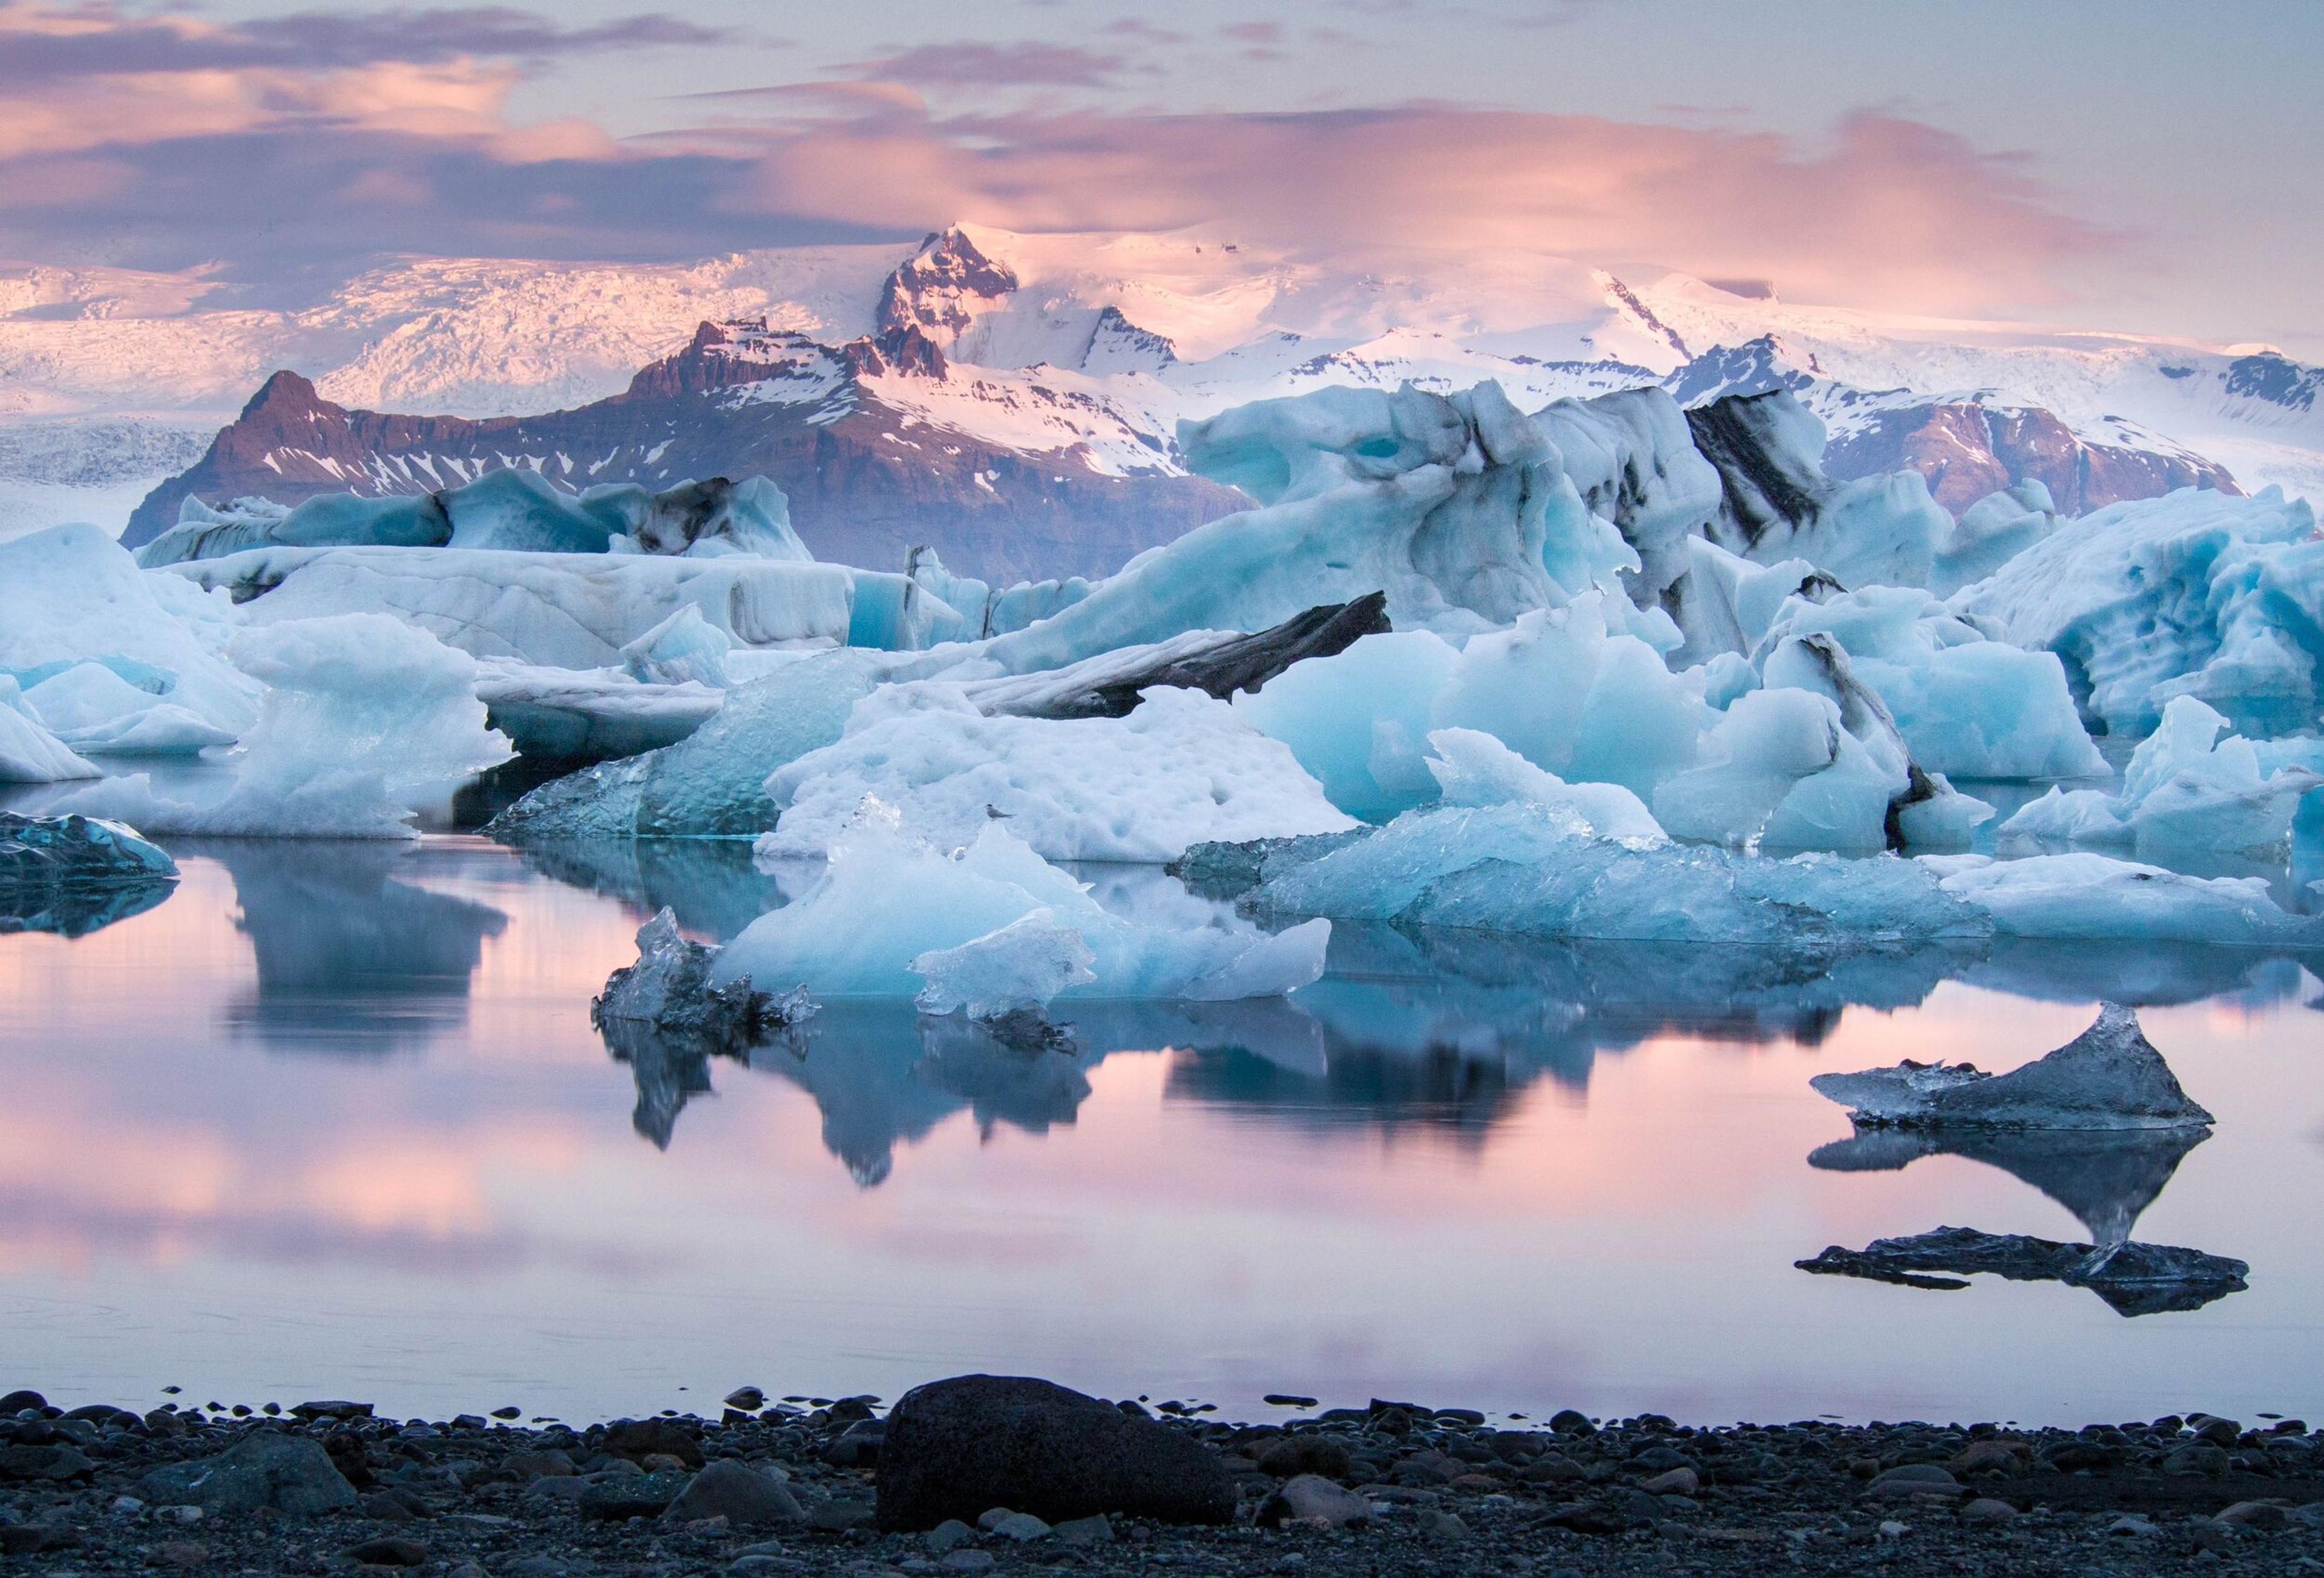 Blue ice bergs floating on a still lake with mountains in the background, in sunset pastel colors